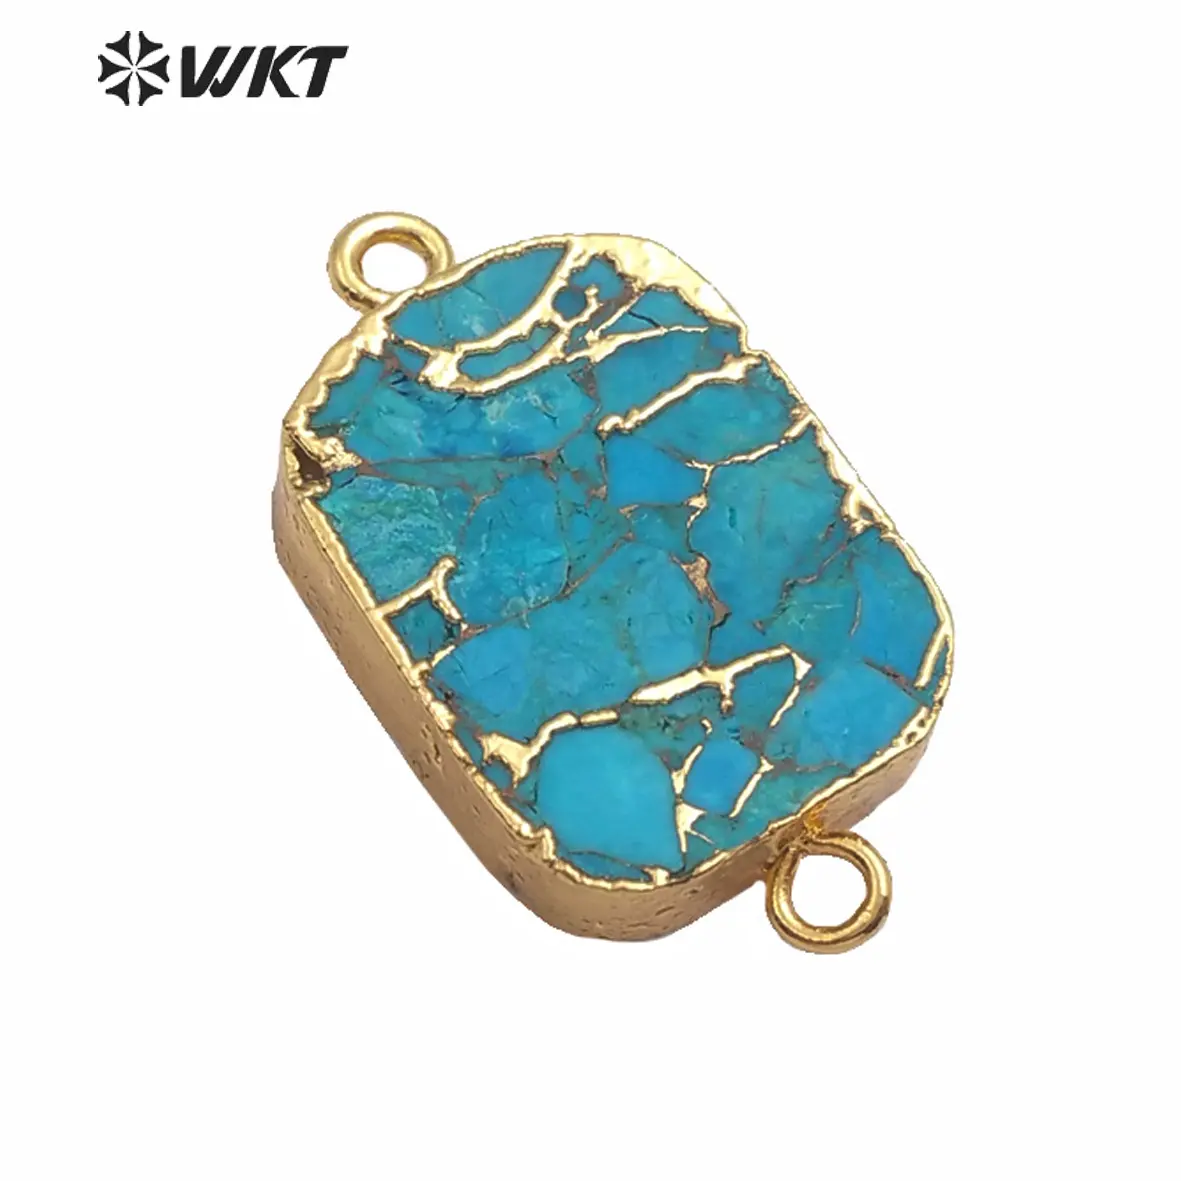 WT-C282 Natural Blue Vein Turquoises Pendant Double Hoops Turquoises Stone Connector Gold Pendant For Women Jewelry Making